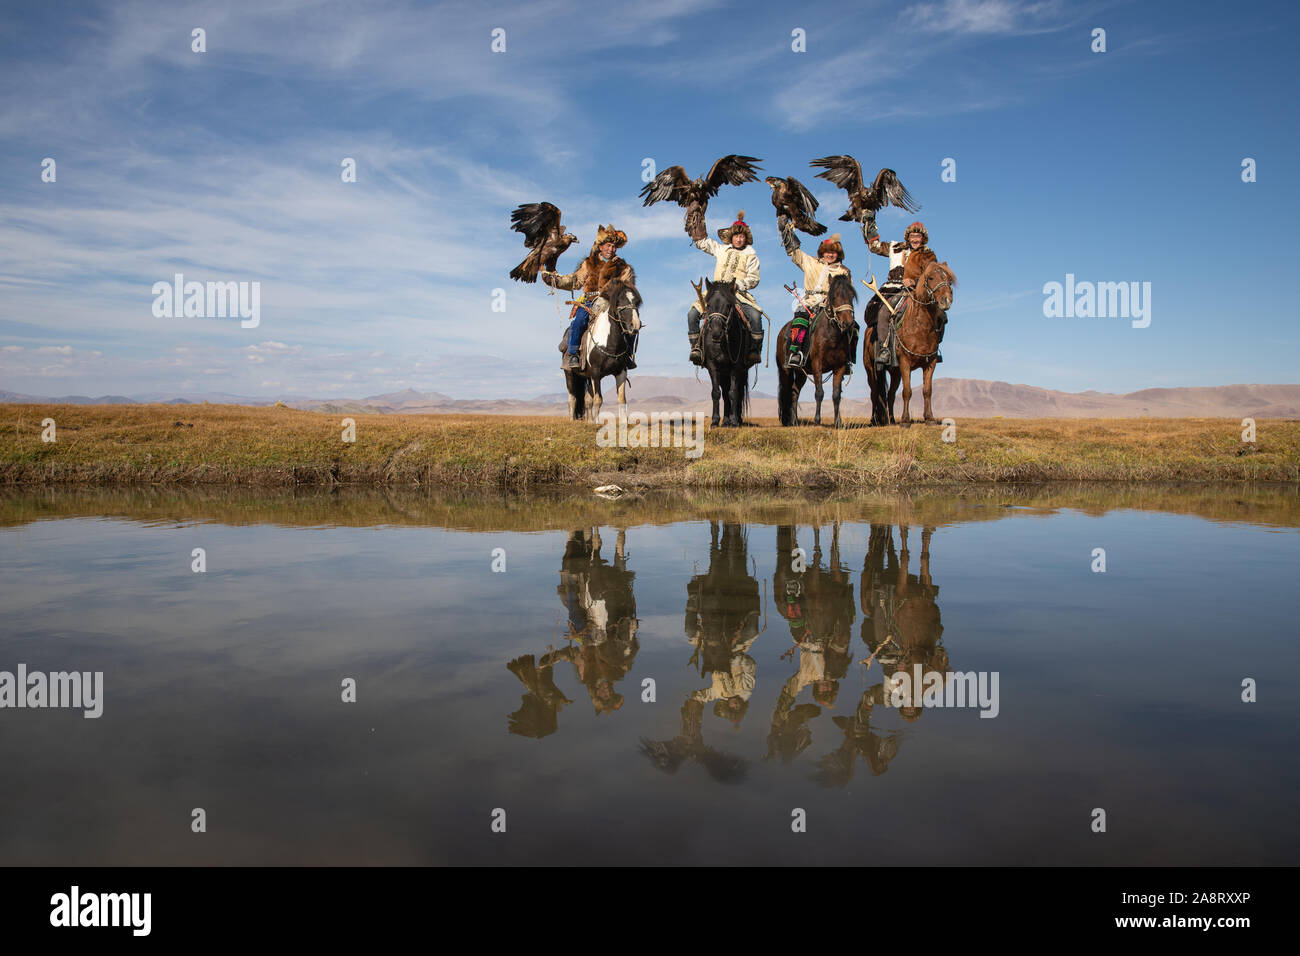 A group of traditional kazakh eagle hunters holding their golden eagles on horseback at the edge of the river with their reflections. Ulgii, Mongolia. Stock Photo